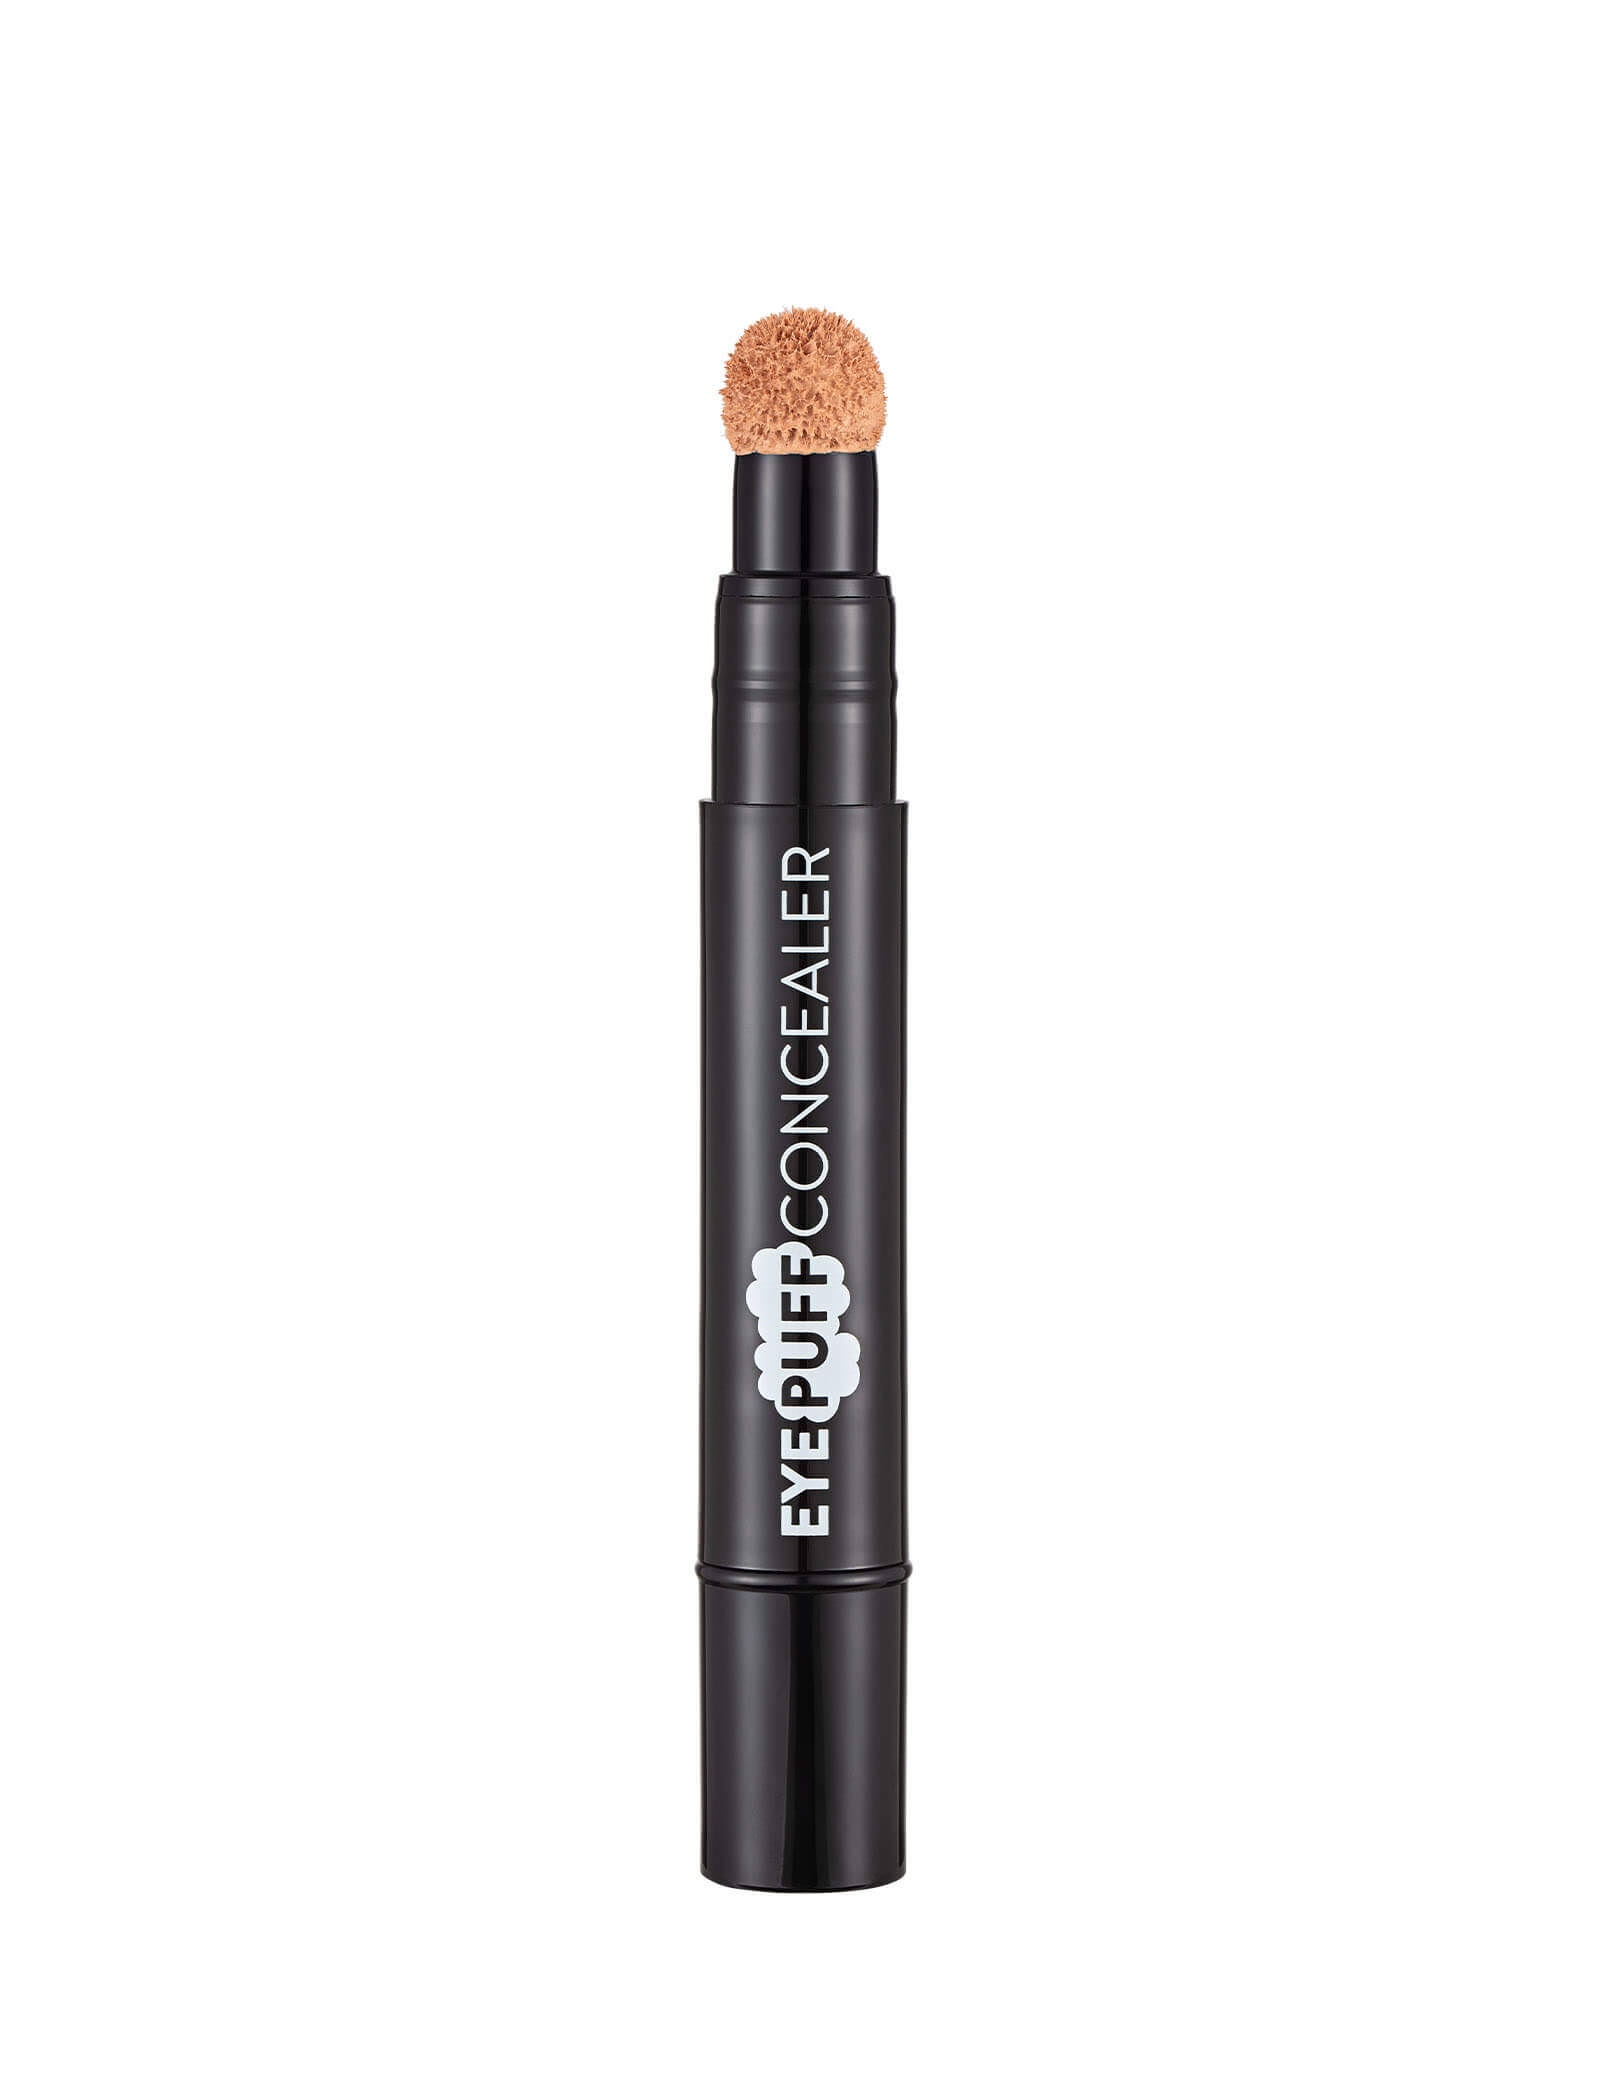 Flormar Eye-puff Concealer 004 Ivory by dpharmacy